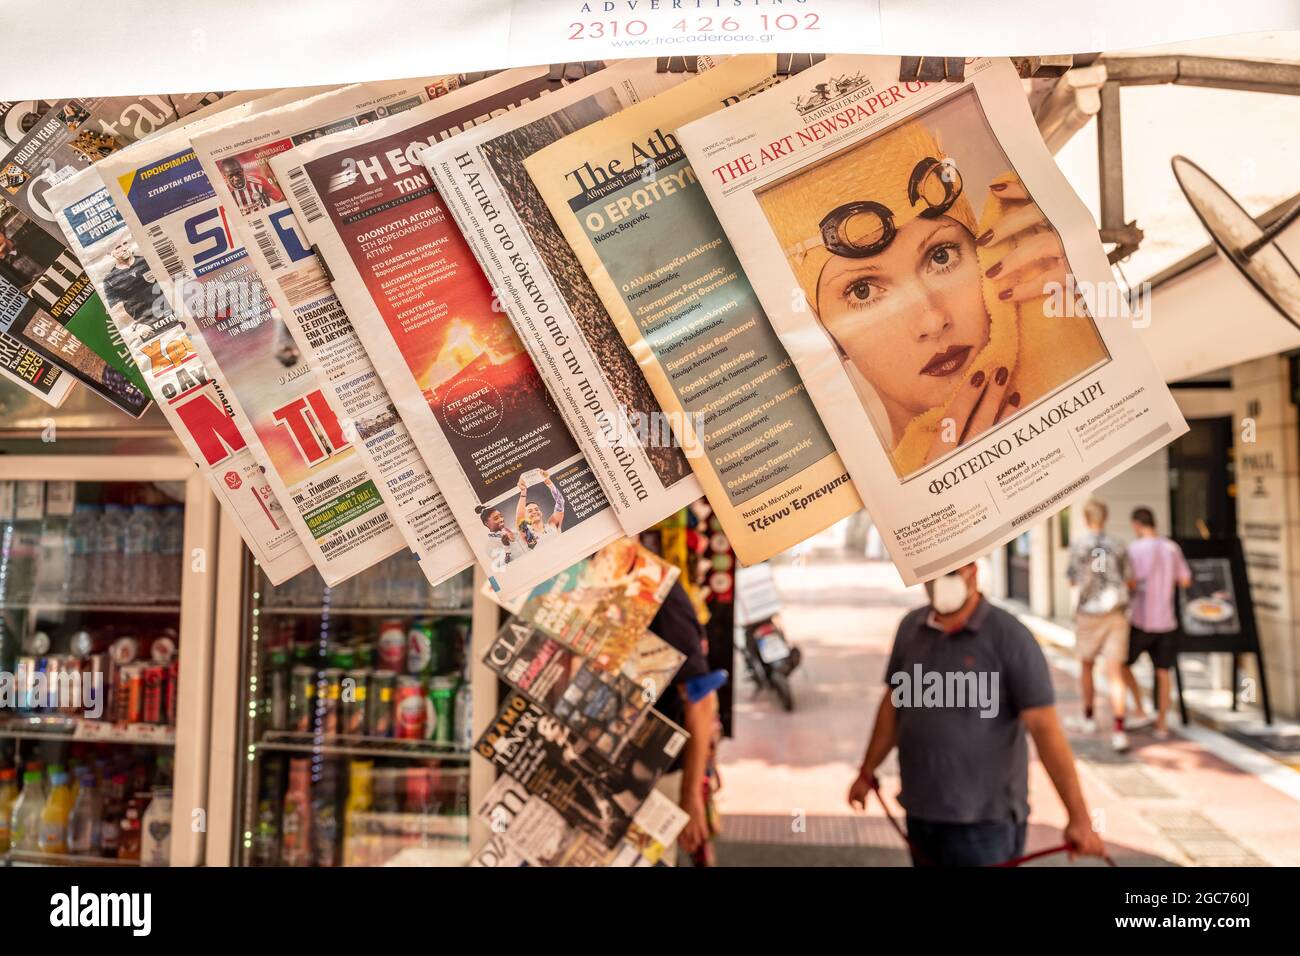 Athens, August 4th 2021: Newspapers on sale at a kiosk in Athens Stock Photo